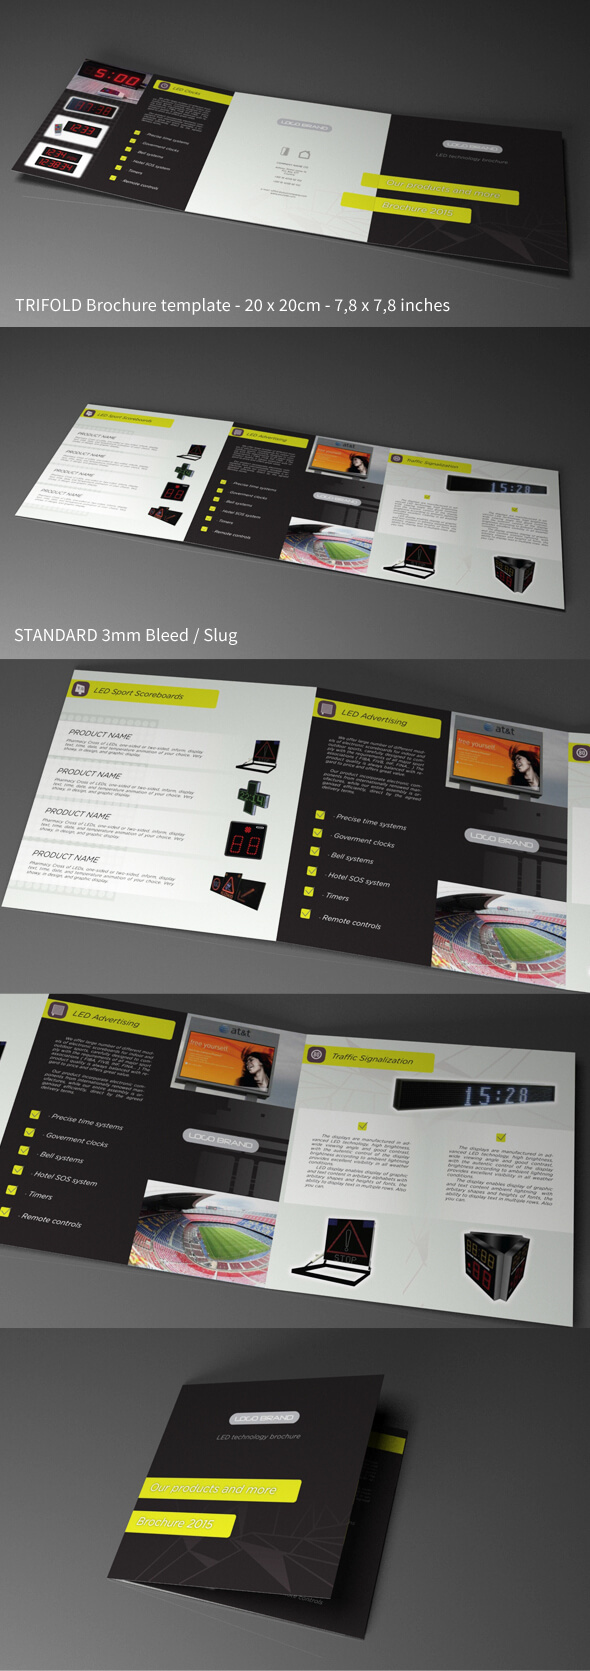 Free Indesign Template – Trifold Square Led Tech On Behance With Regard To Adobe Indesign Tri Fold Brochure Template